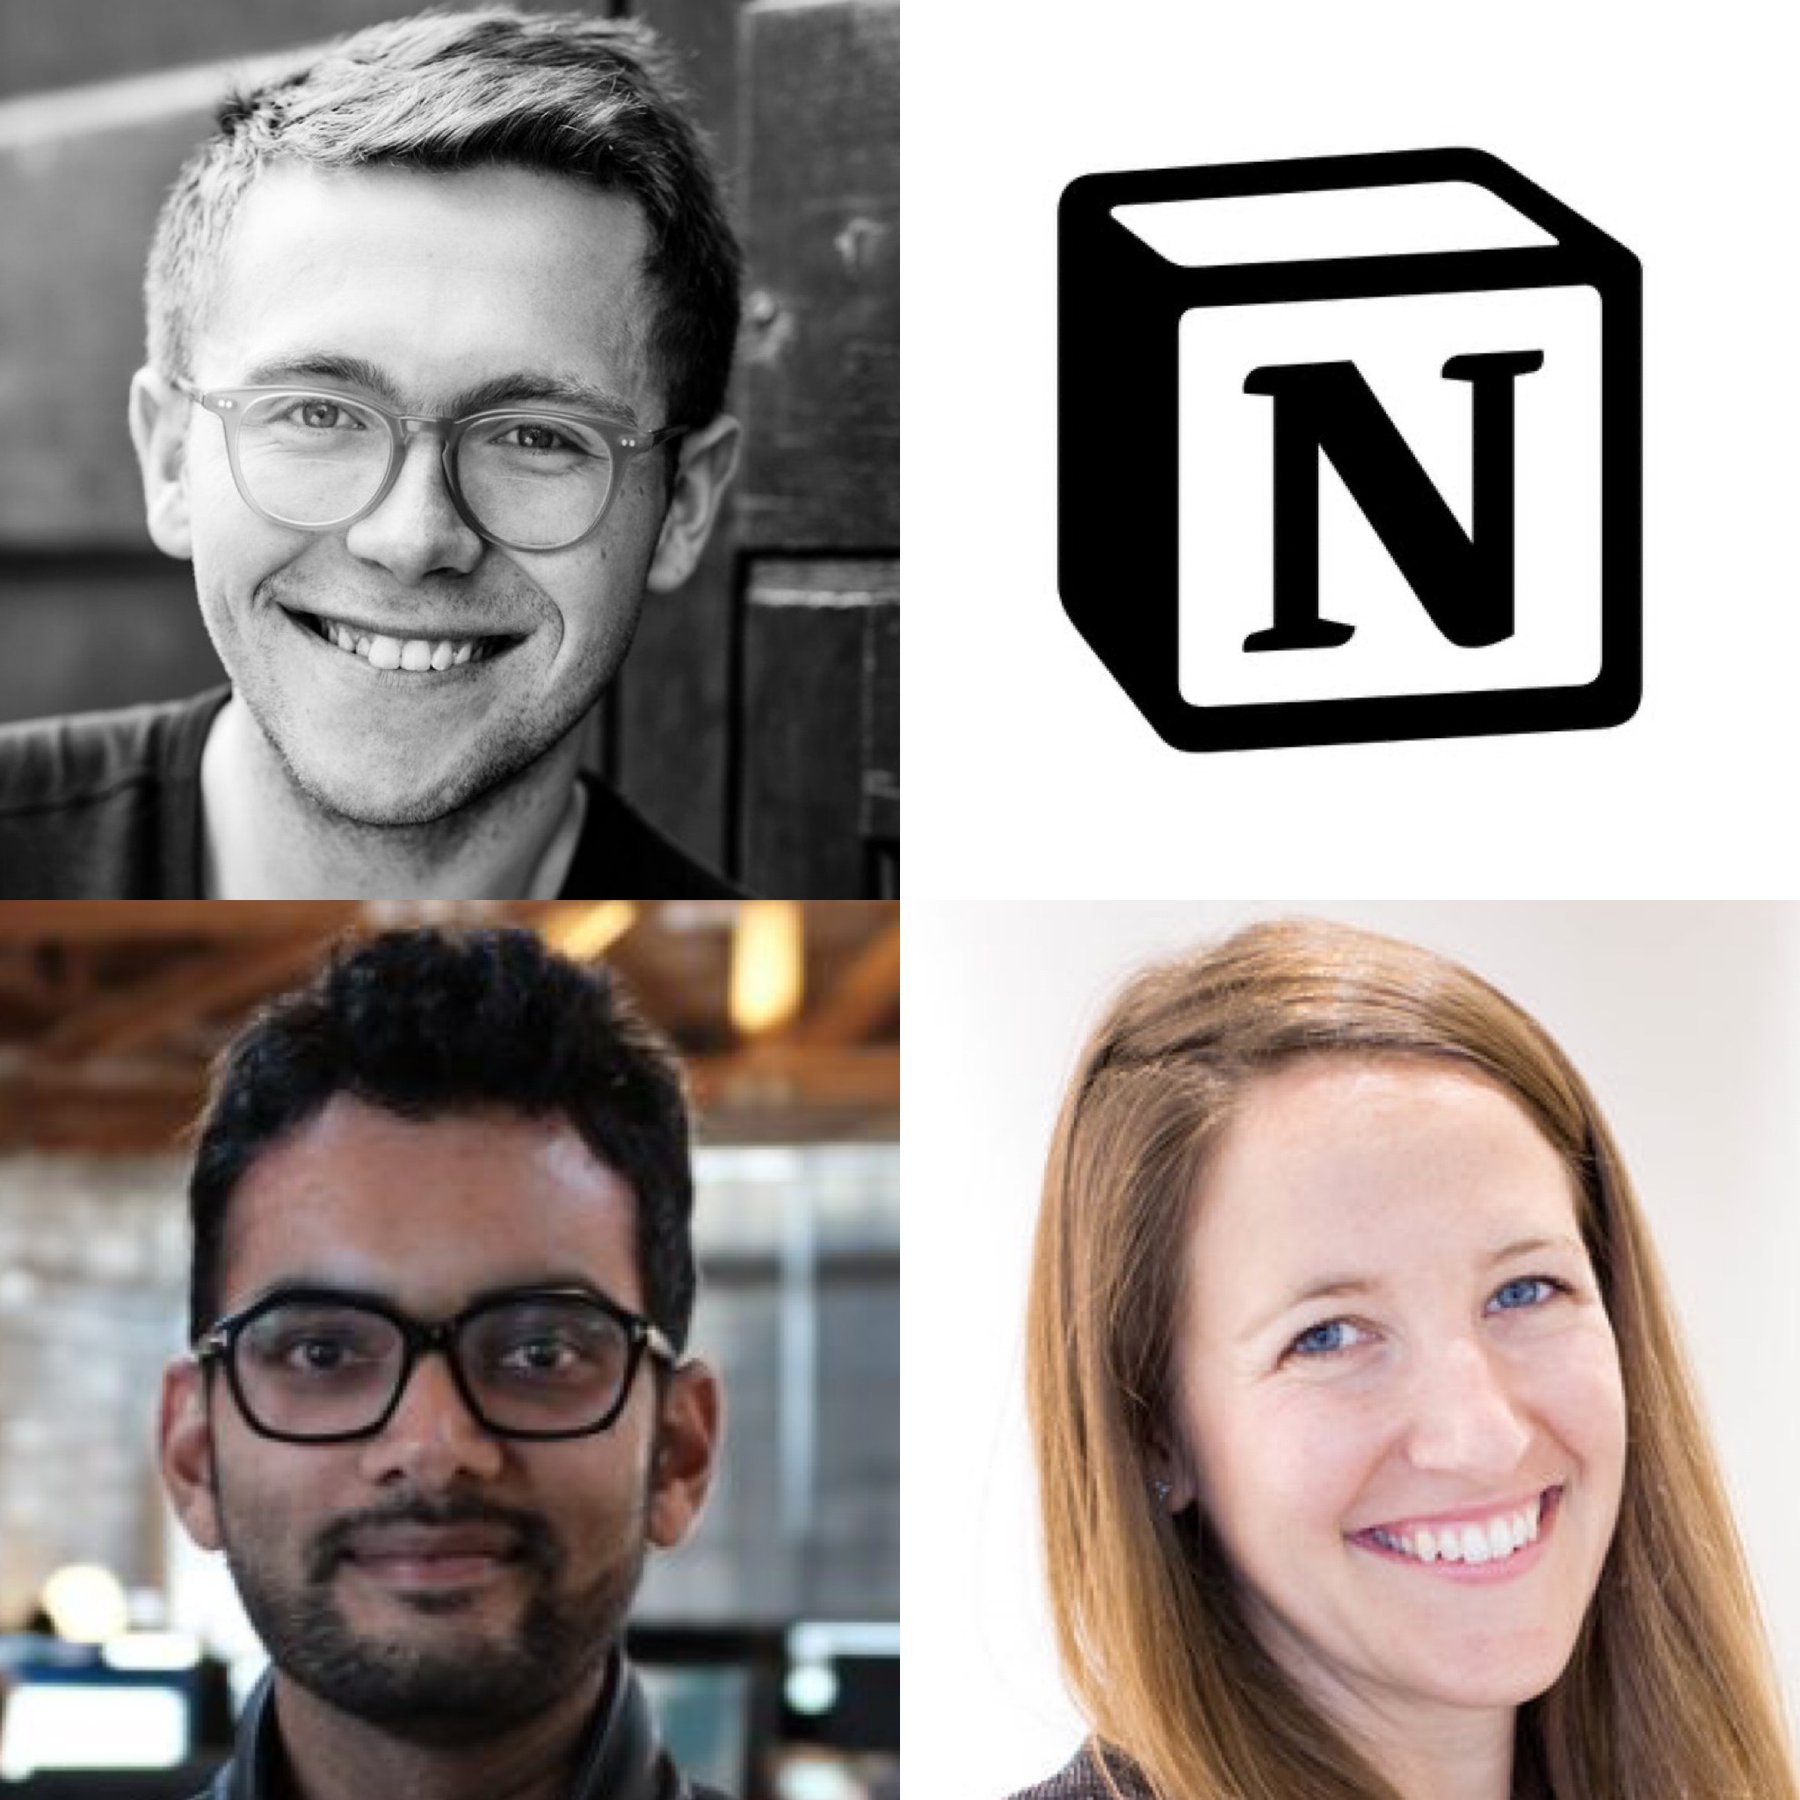 Harry Stebbings of 20VC, Akshay Kothari of Notion, and Sarah Cannon of Index Ventures